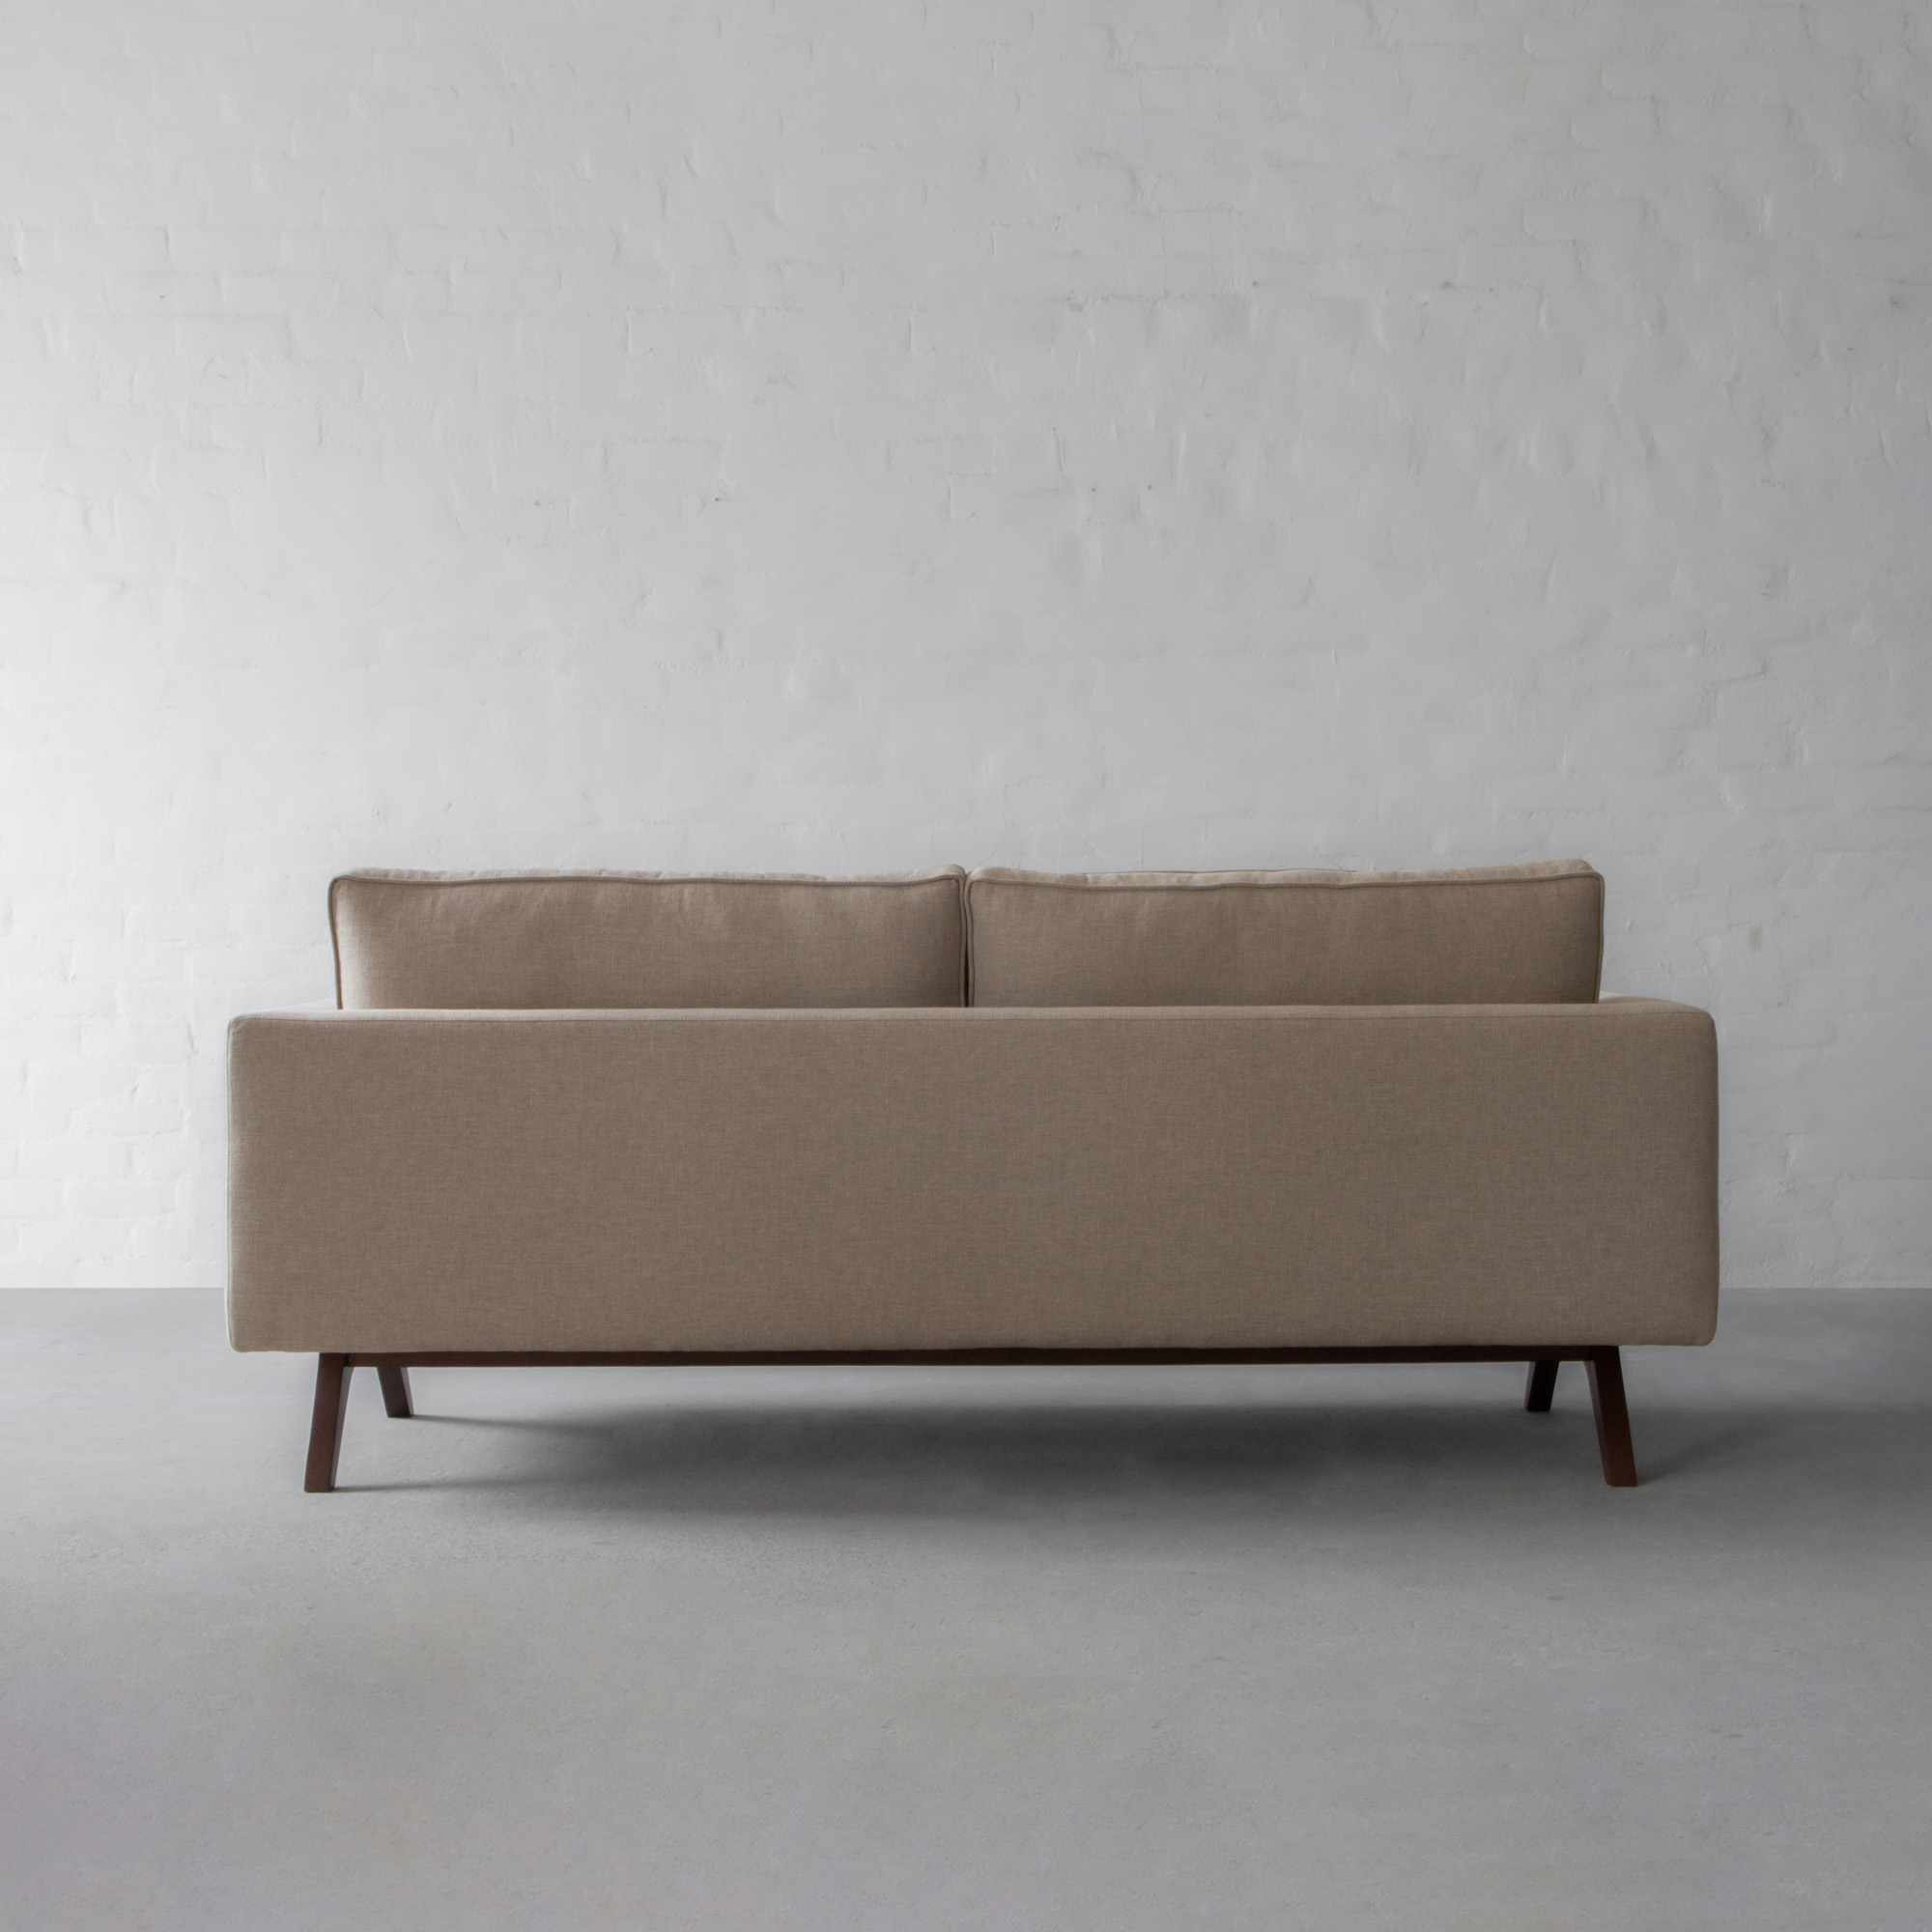 Istanbul Fabric Sofa Collection